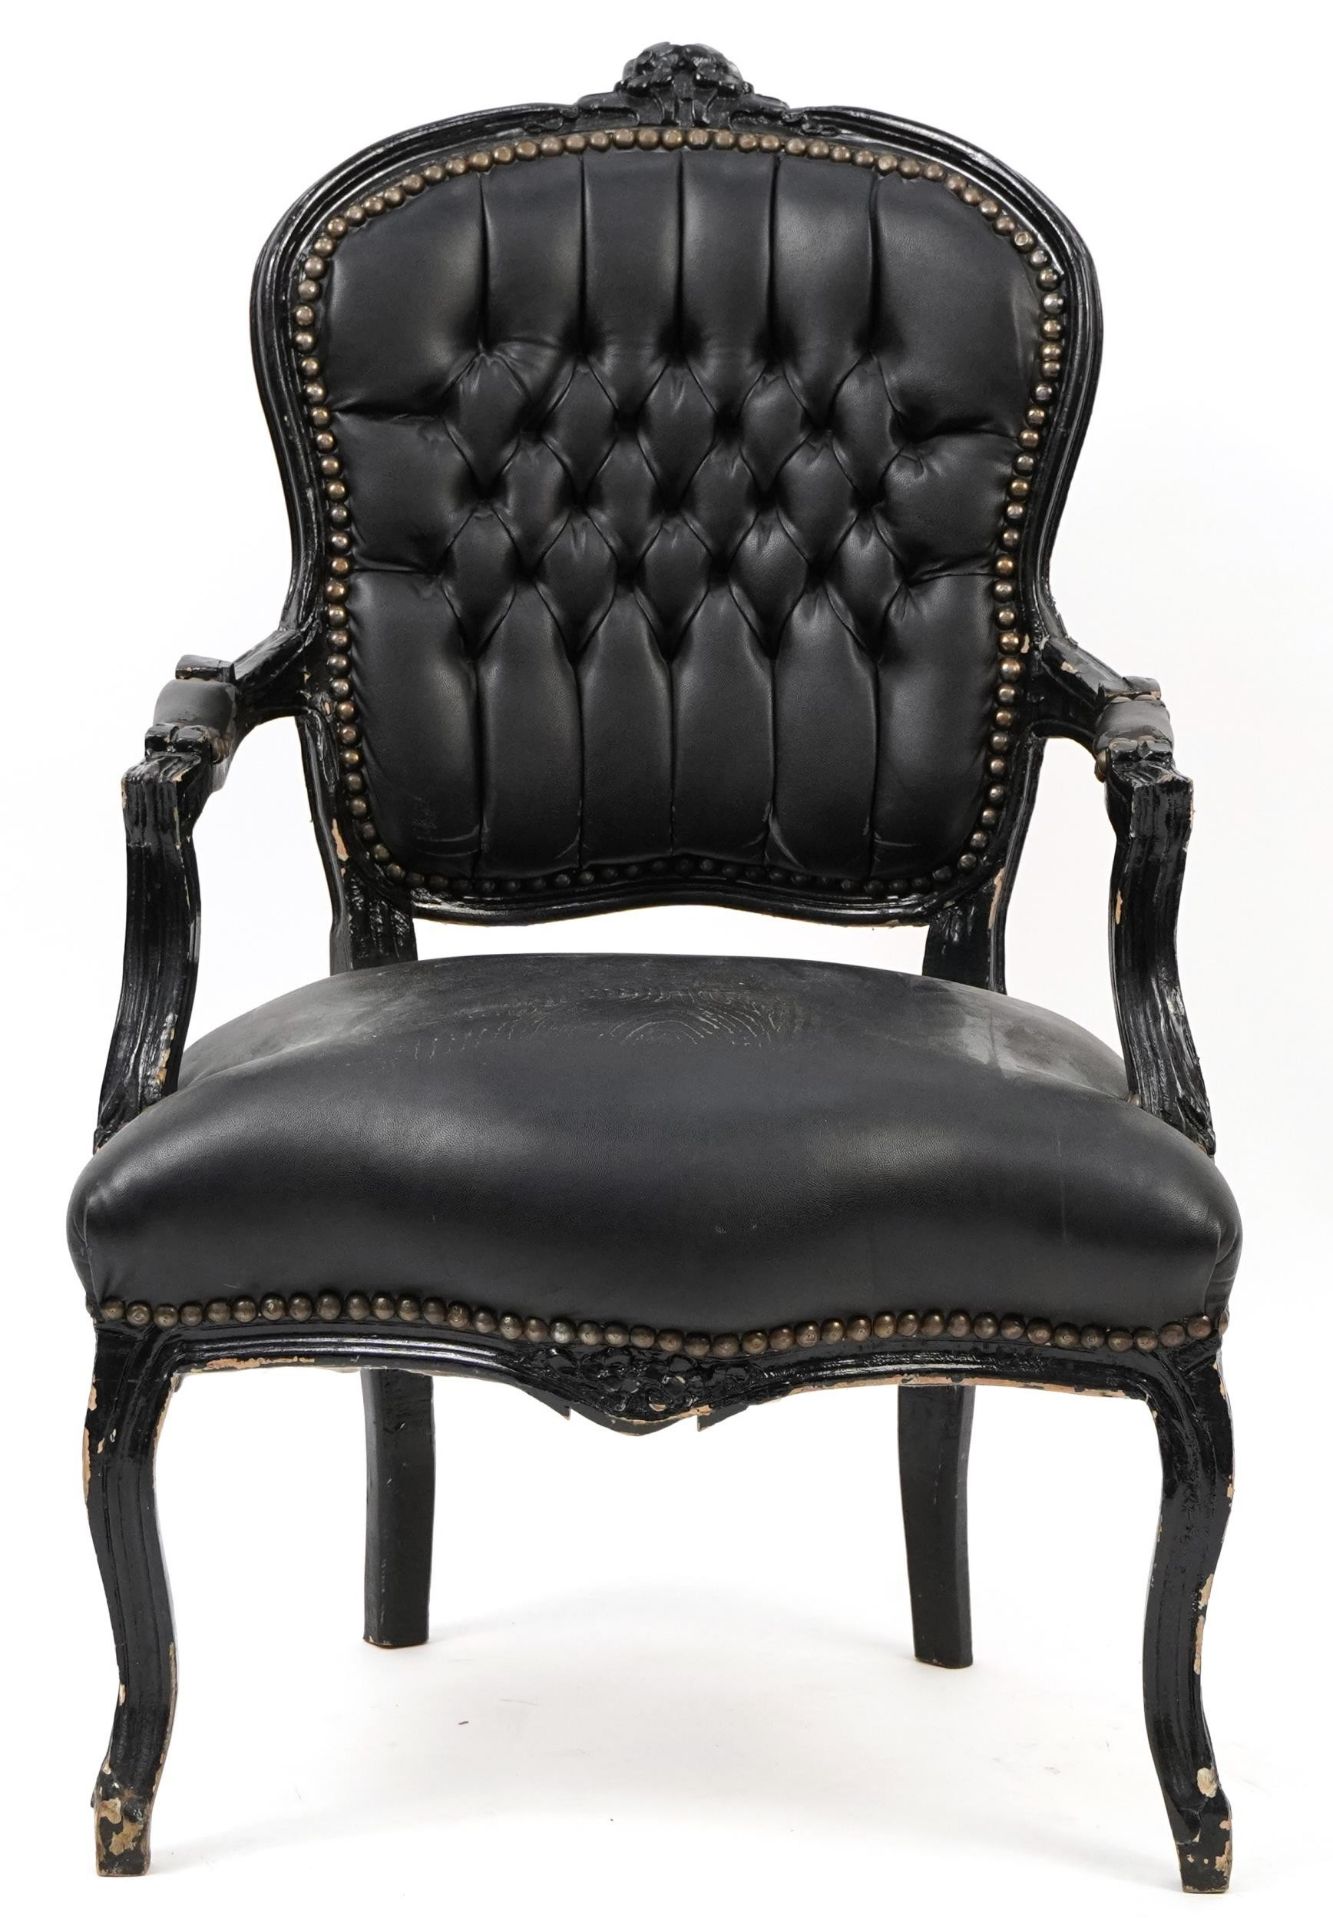 French style black painted elbow chair with black faux leather button back upholstery, 92cm high - Image 2 of 3